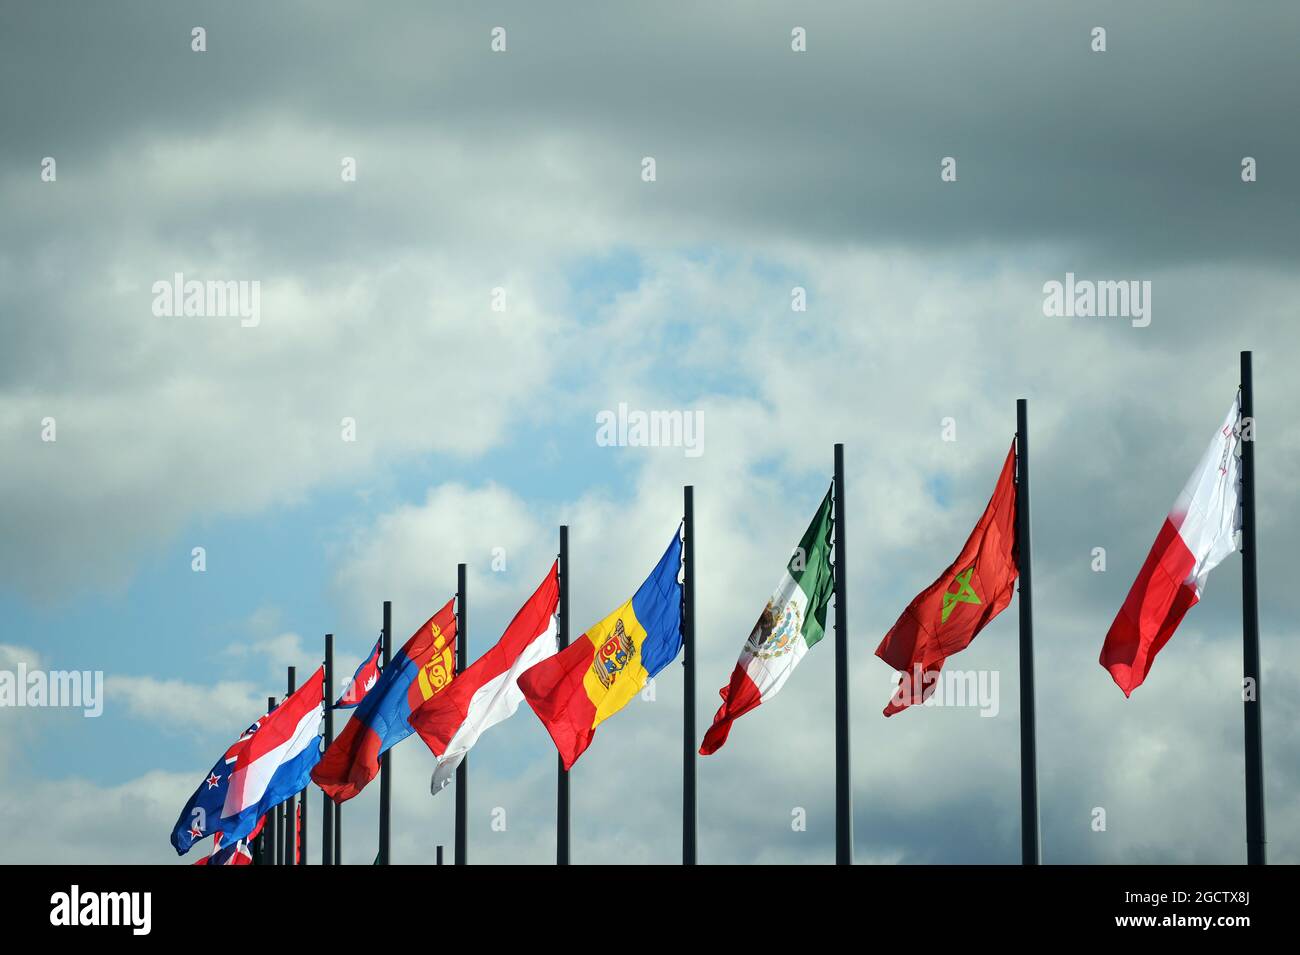 Flags of many nations. Russian Grand Prix, Thursday 9th October 2014. Sochi Autodrom, Sochi, Russia. Stock Photo